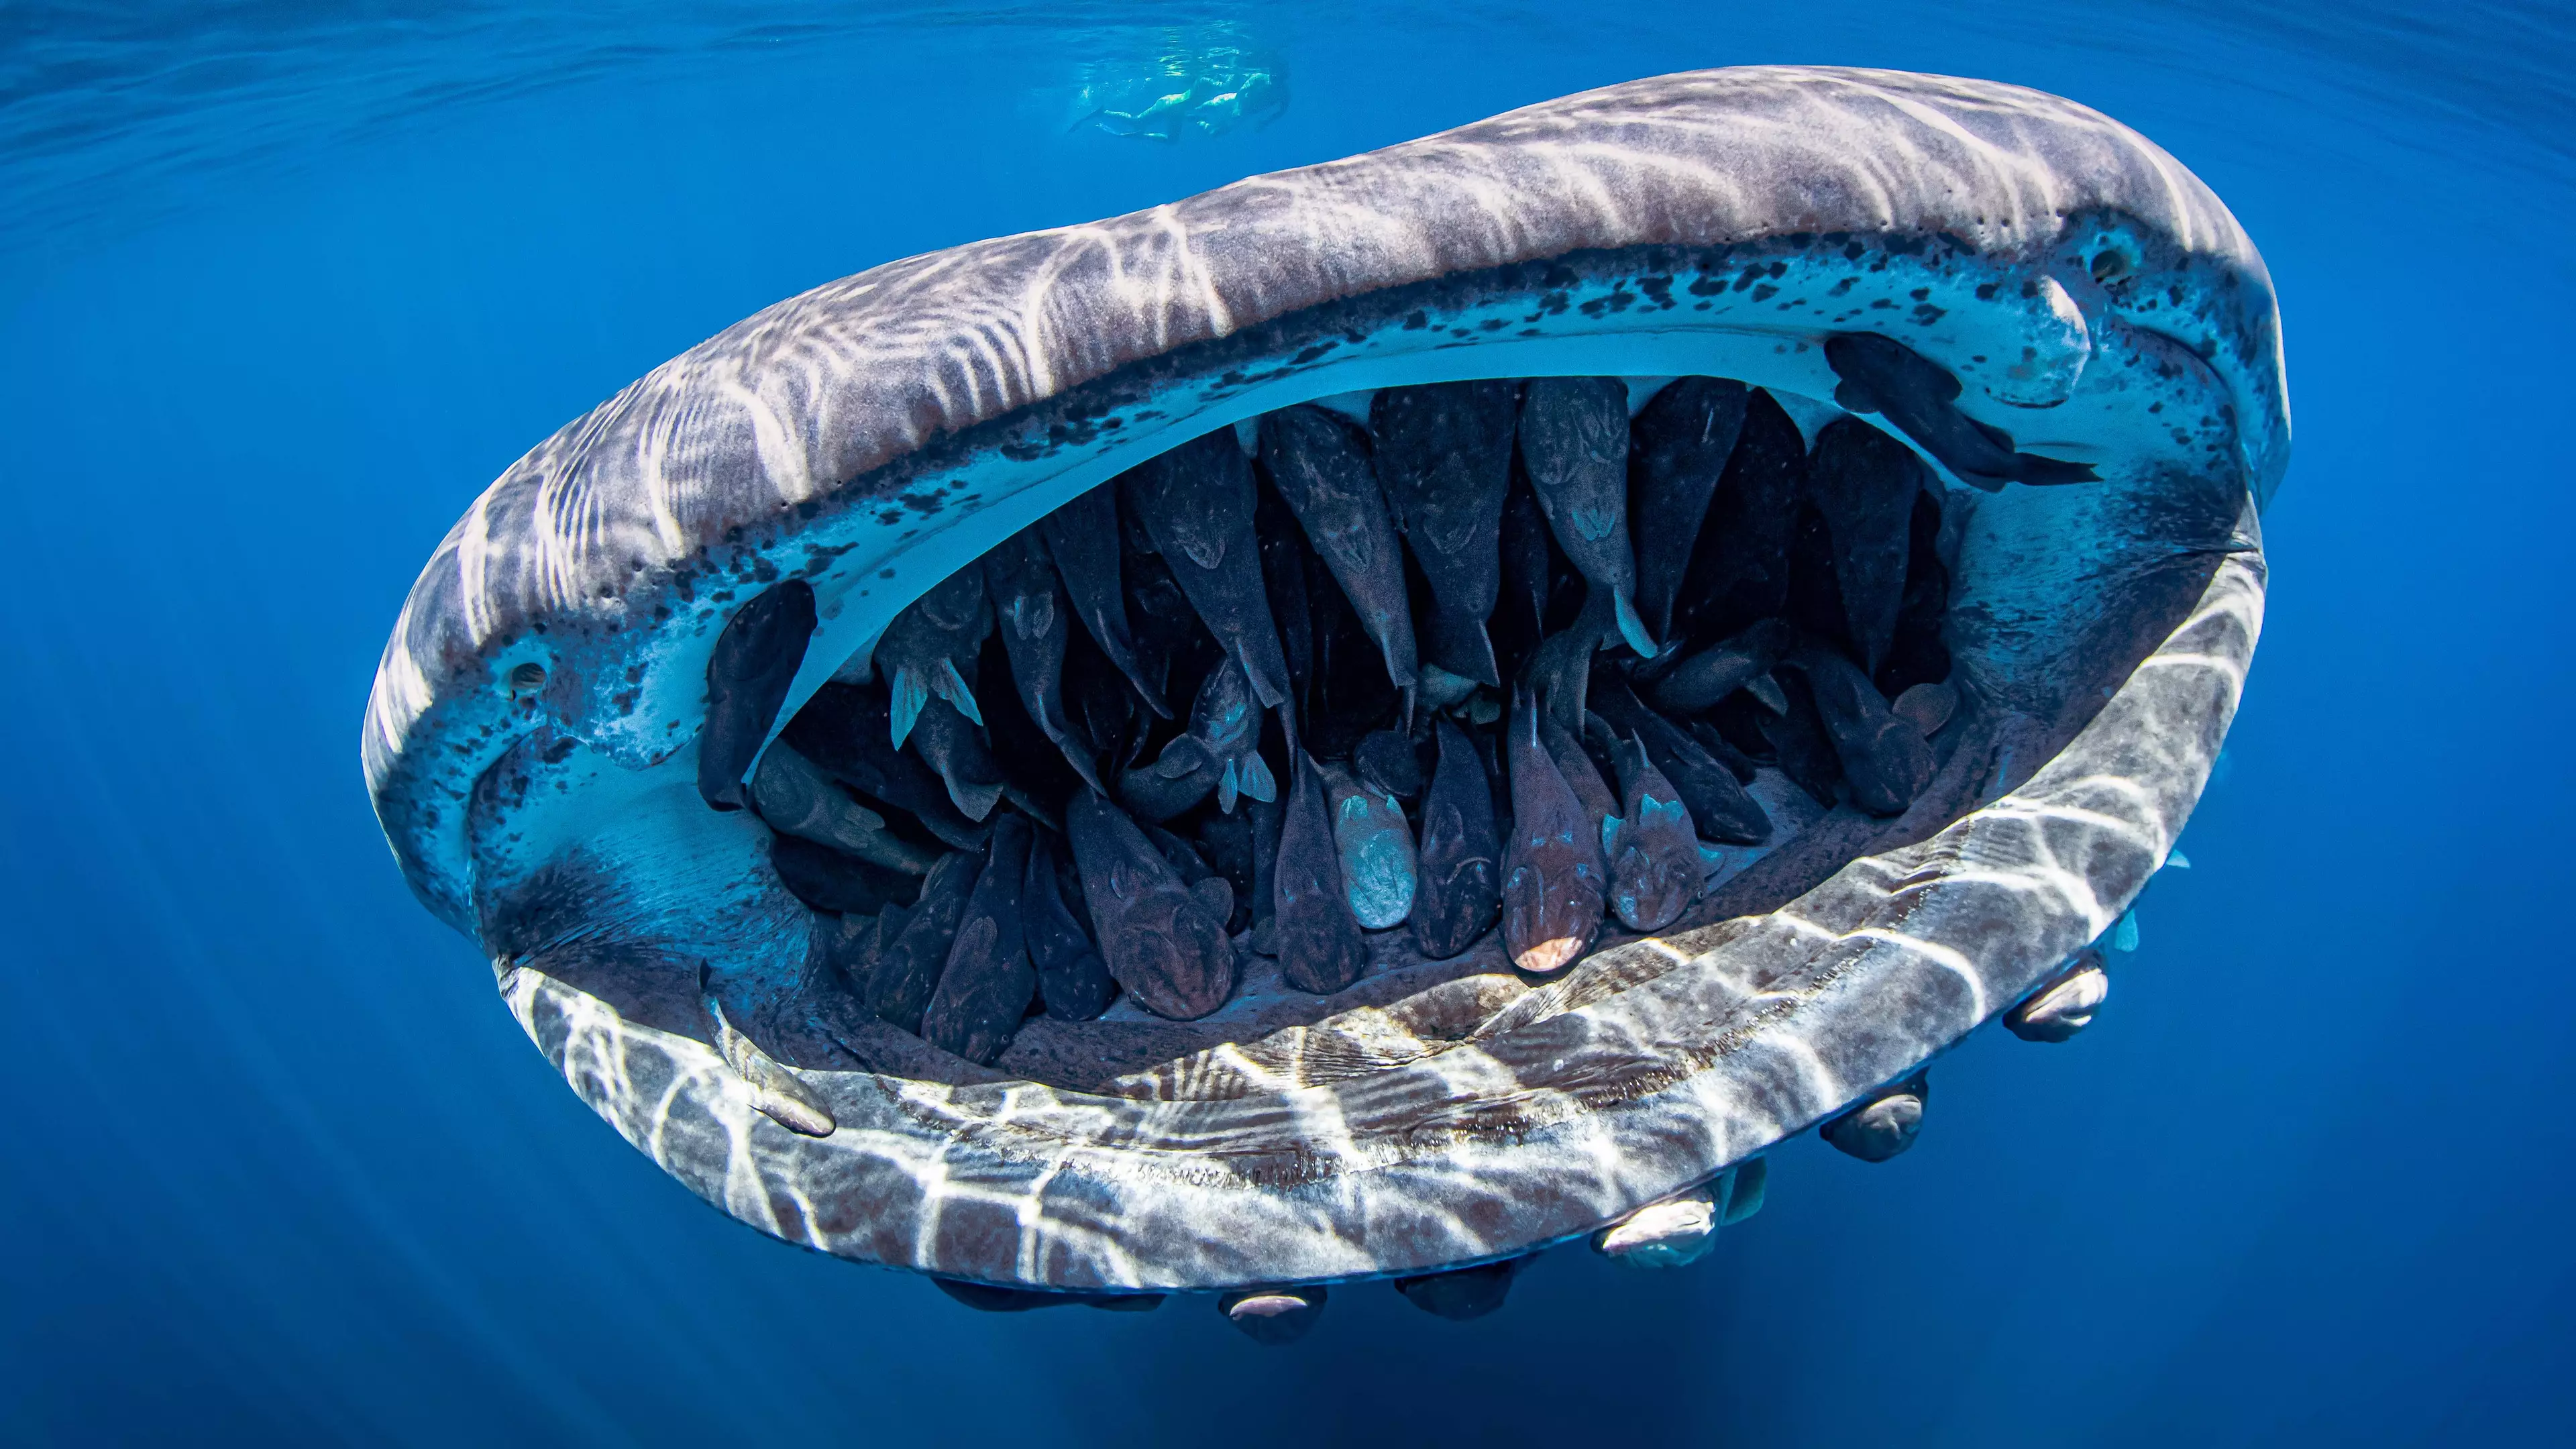 Award-Winning Photo Shows Whale Shark's Mouth Filled With Shoal Of Fish